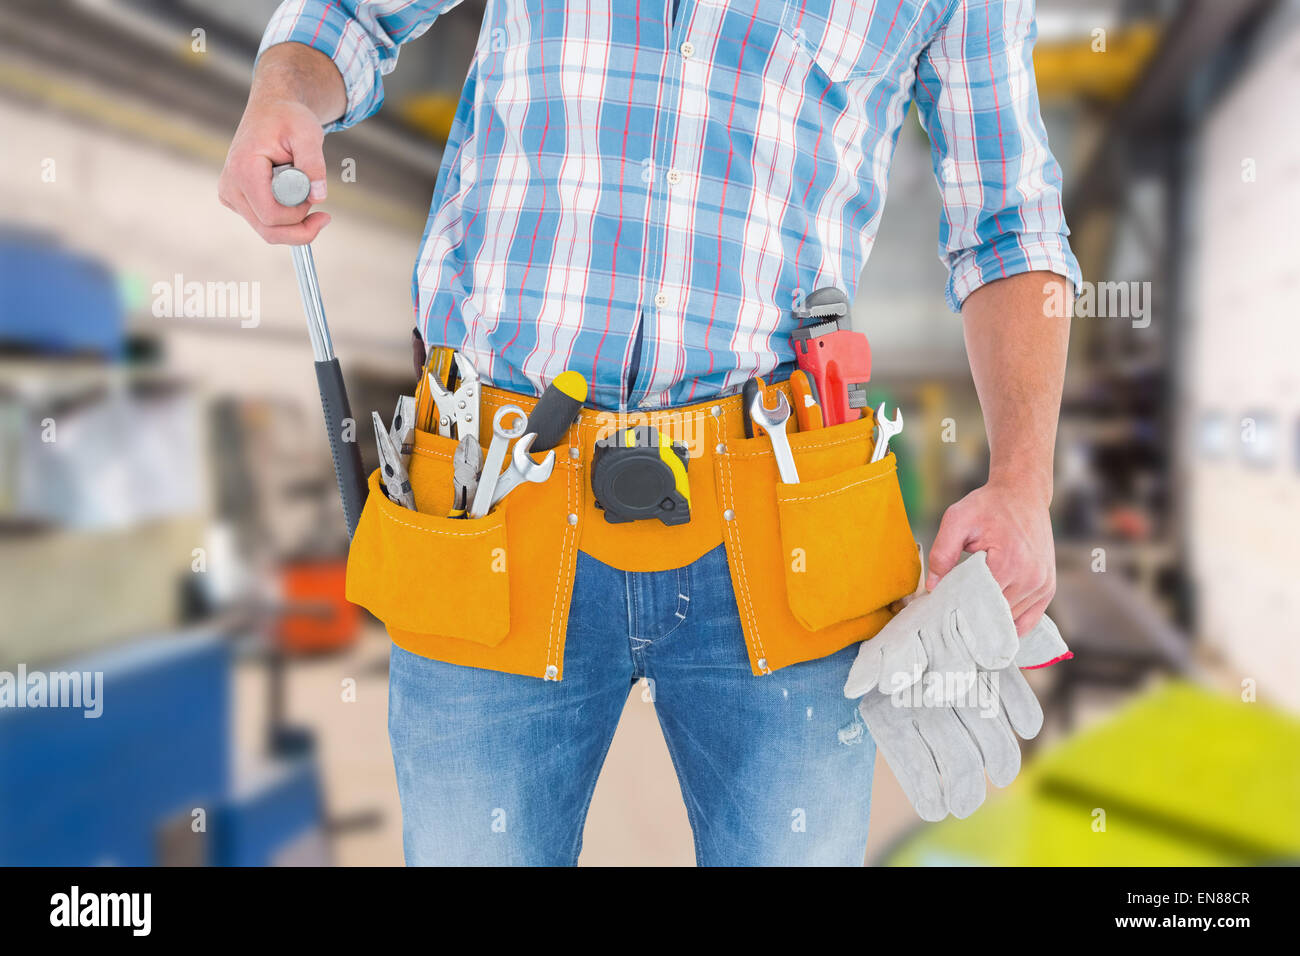 Composite image of midsection of handyman holding hammer and gloves Stock Photo